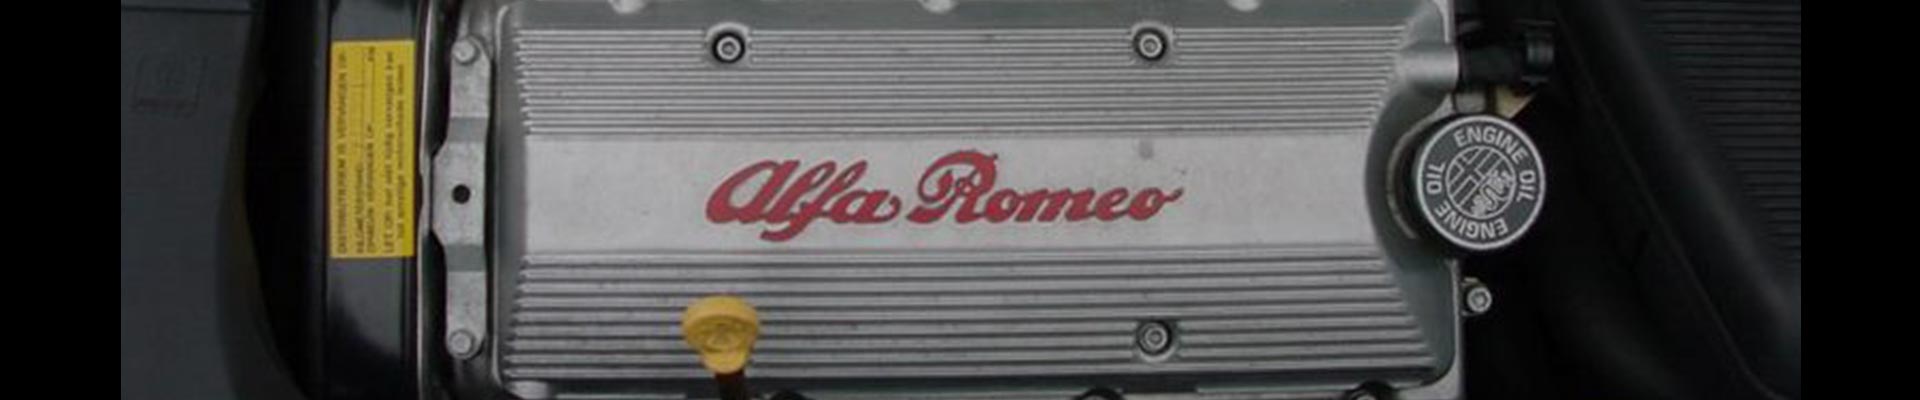 Shop Replacement Alfa Romeo Milano Parts with Discounted Price on the Net